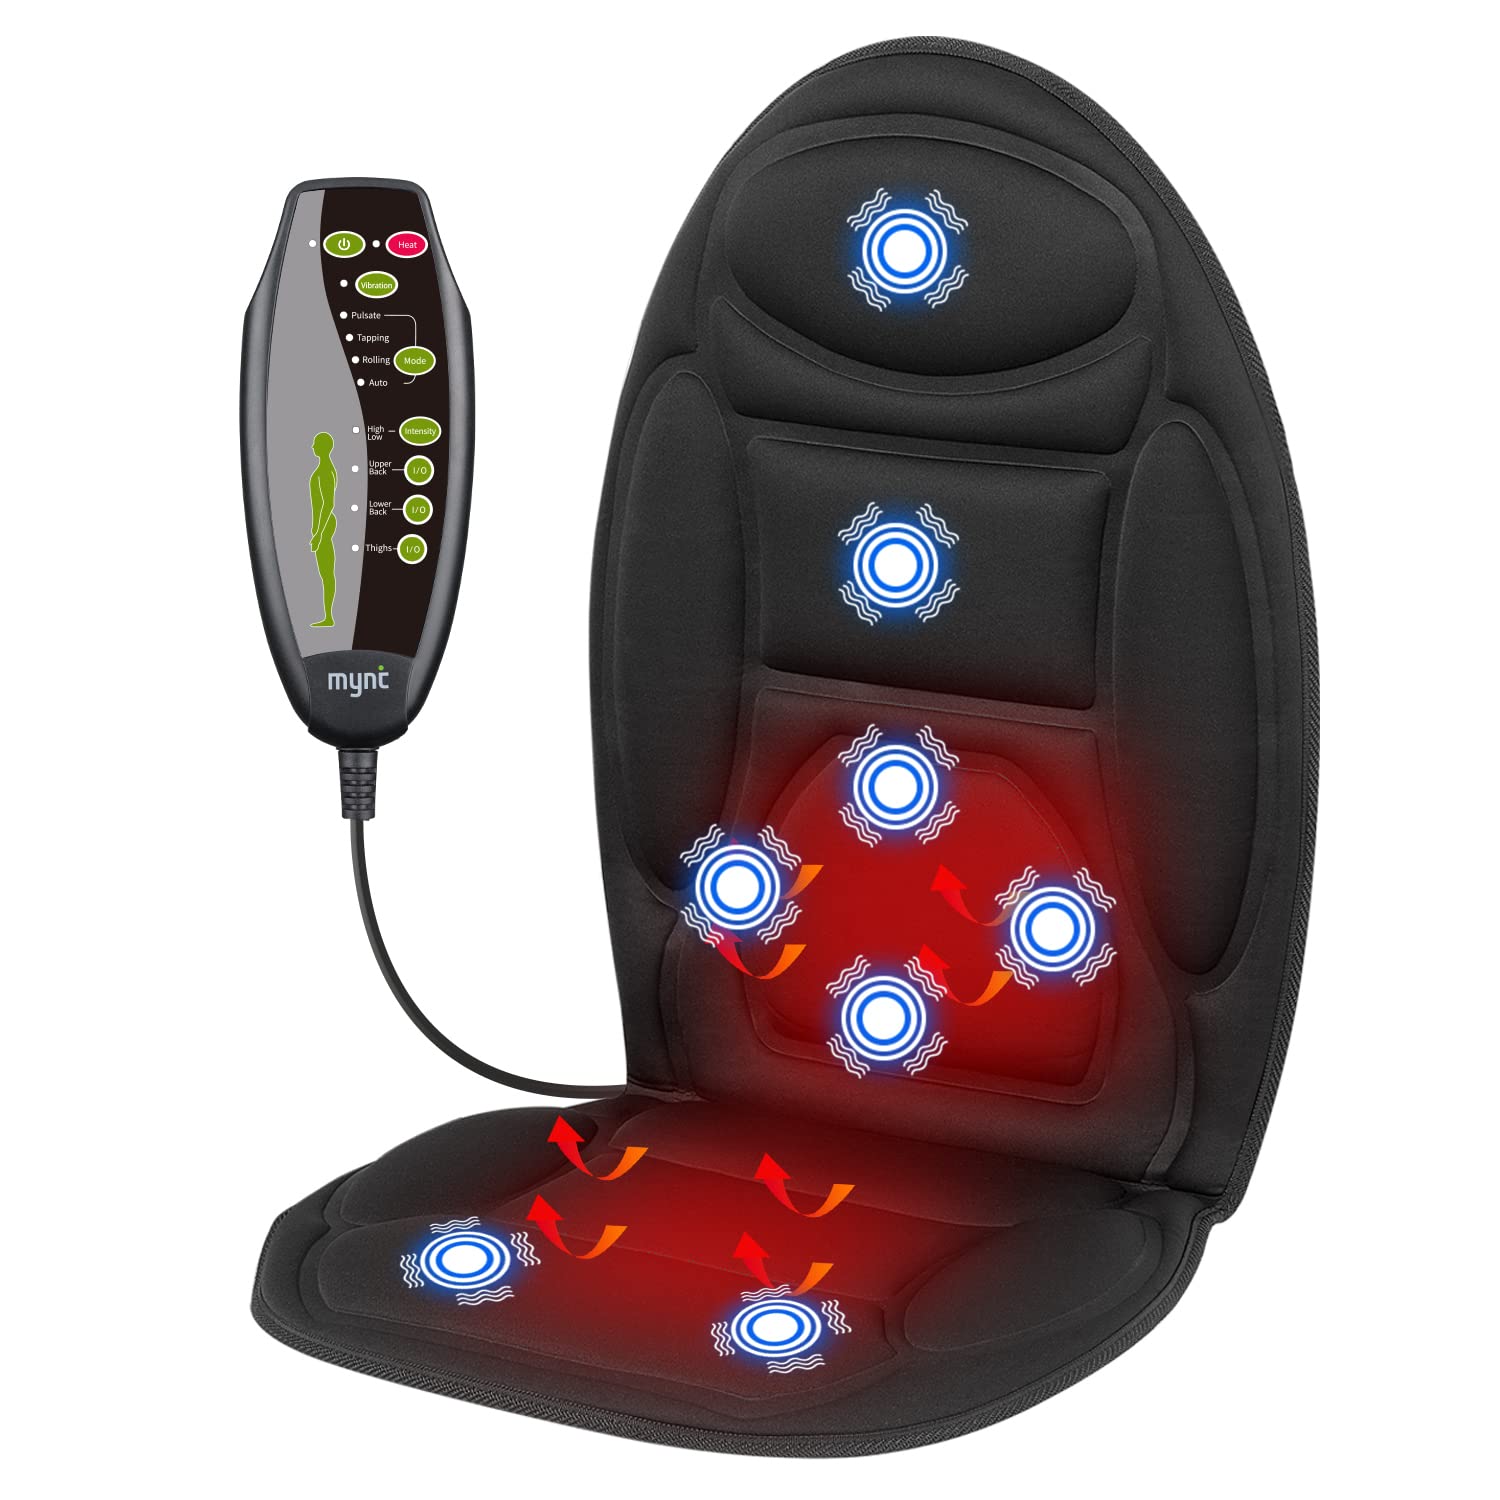 Seat Massager with Heat, Vibrating Back Massage Cushion, Vibrating Nodes to Relieve